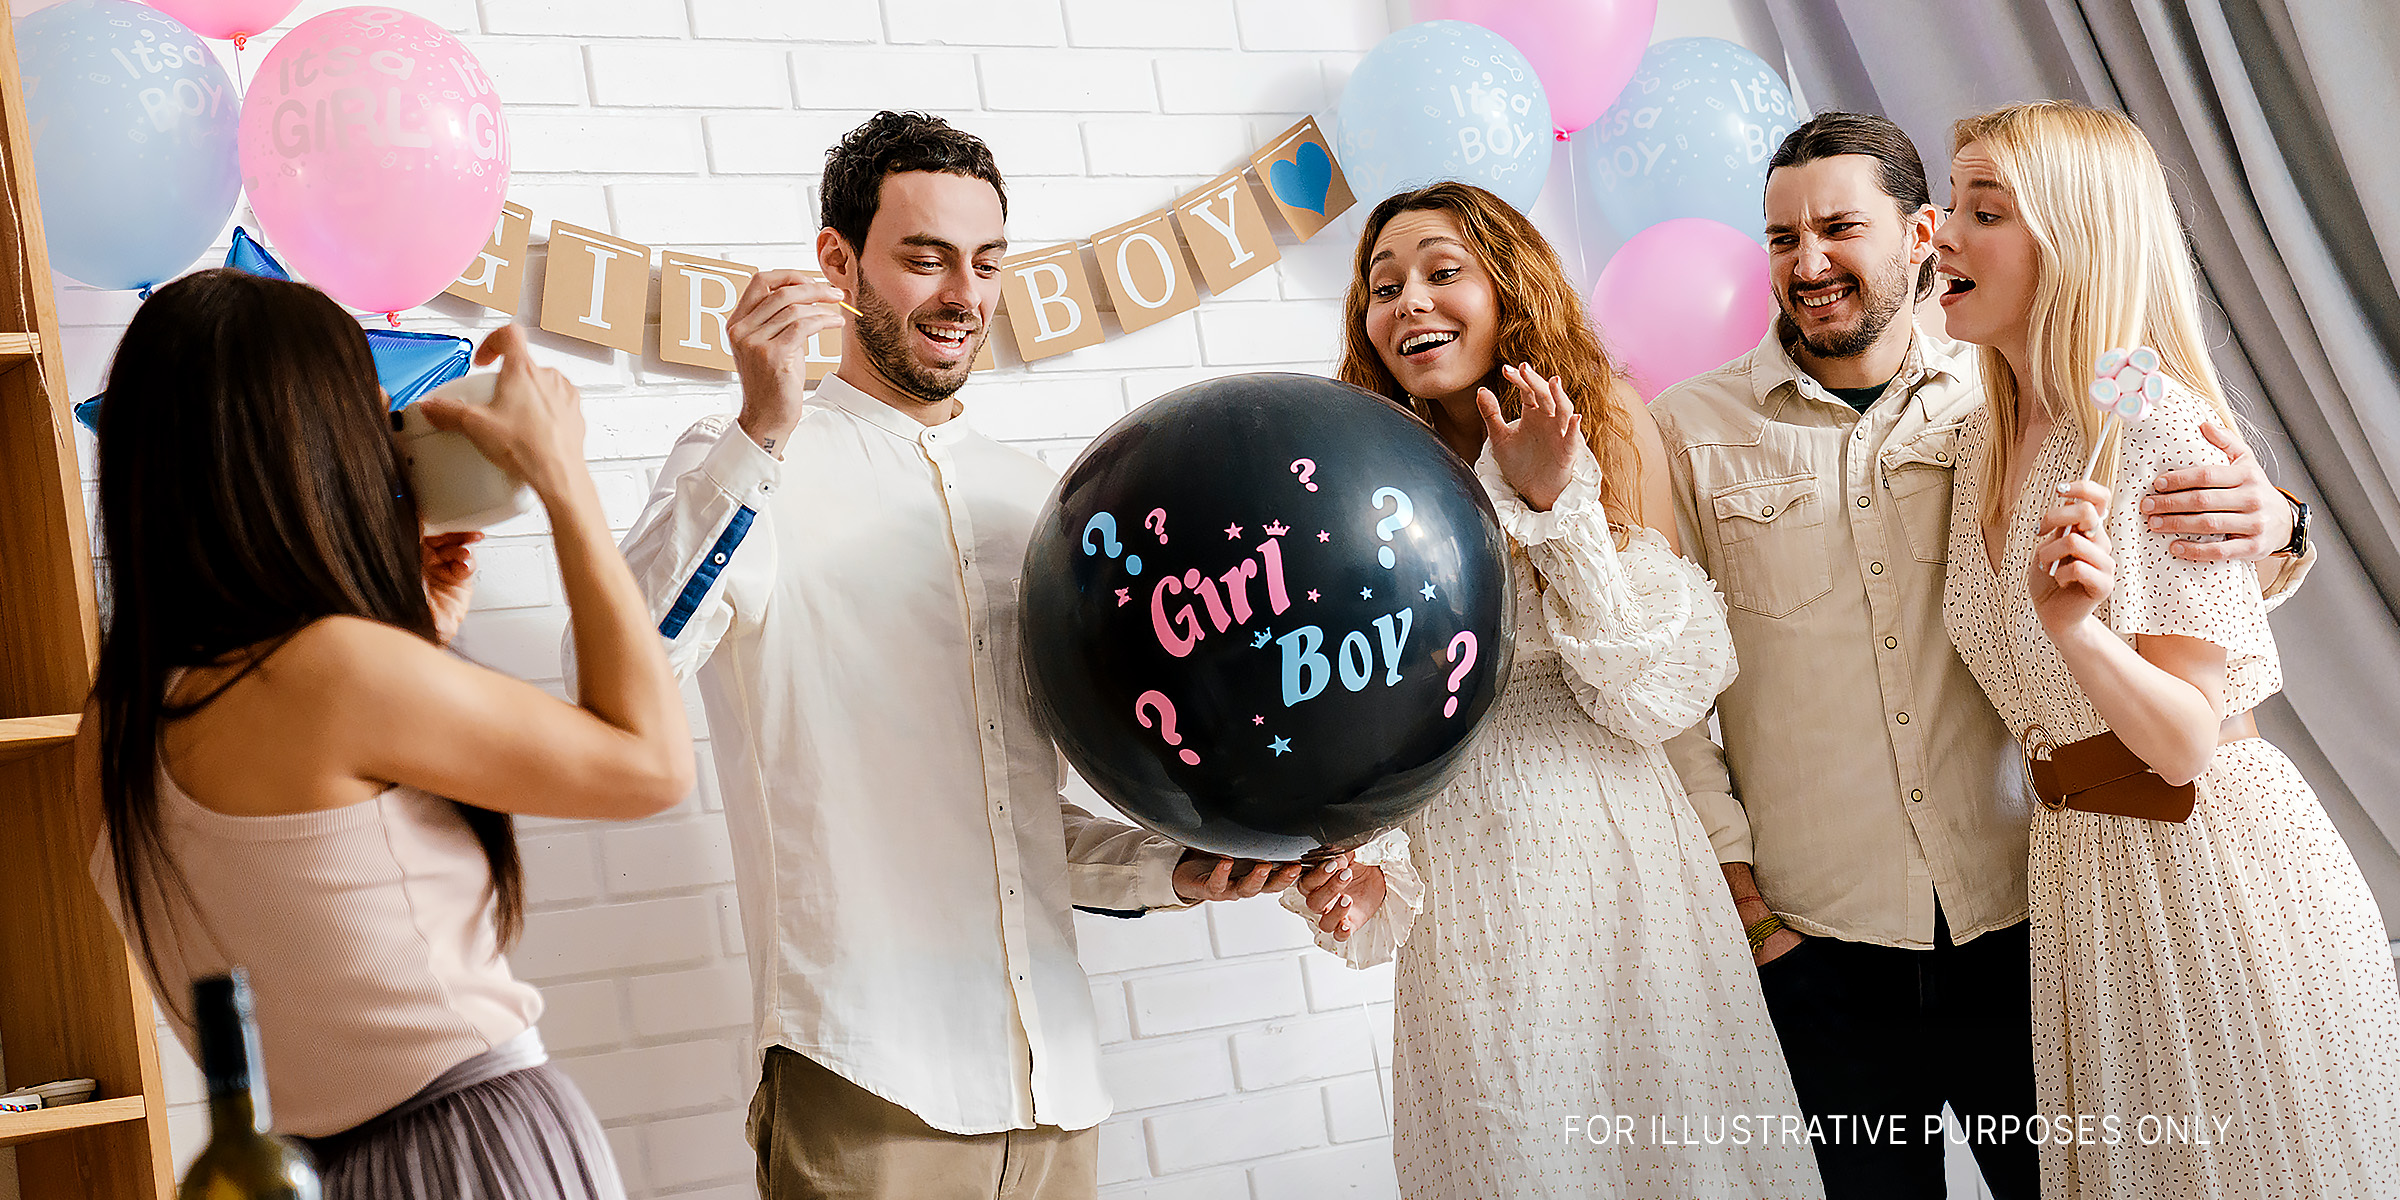 Guests at a gender reveal party | Source: Shutterstock